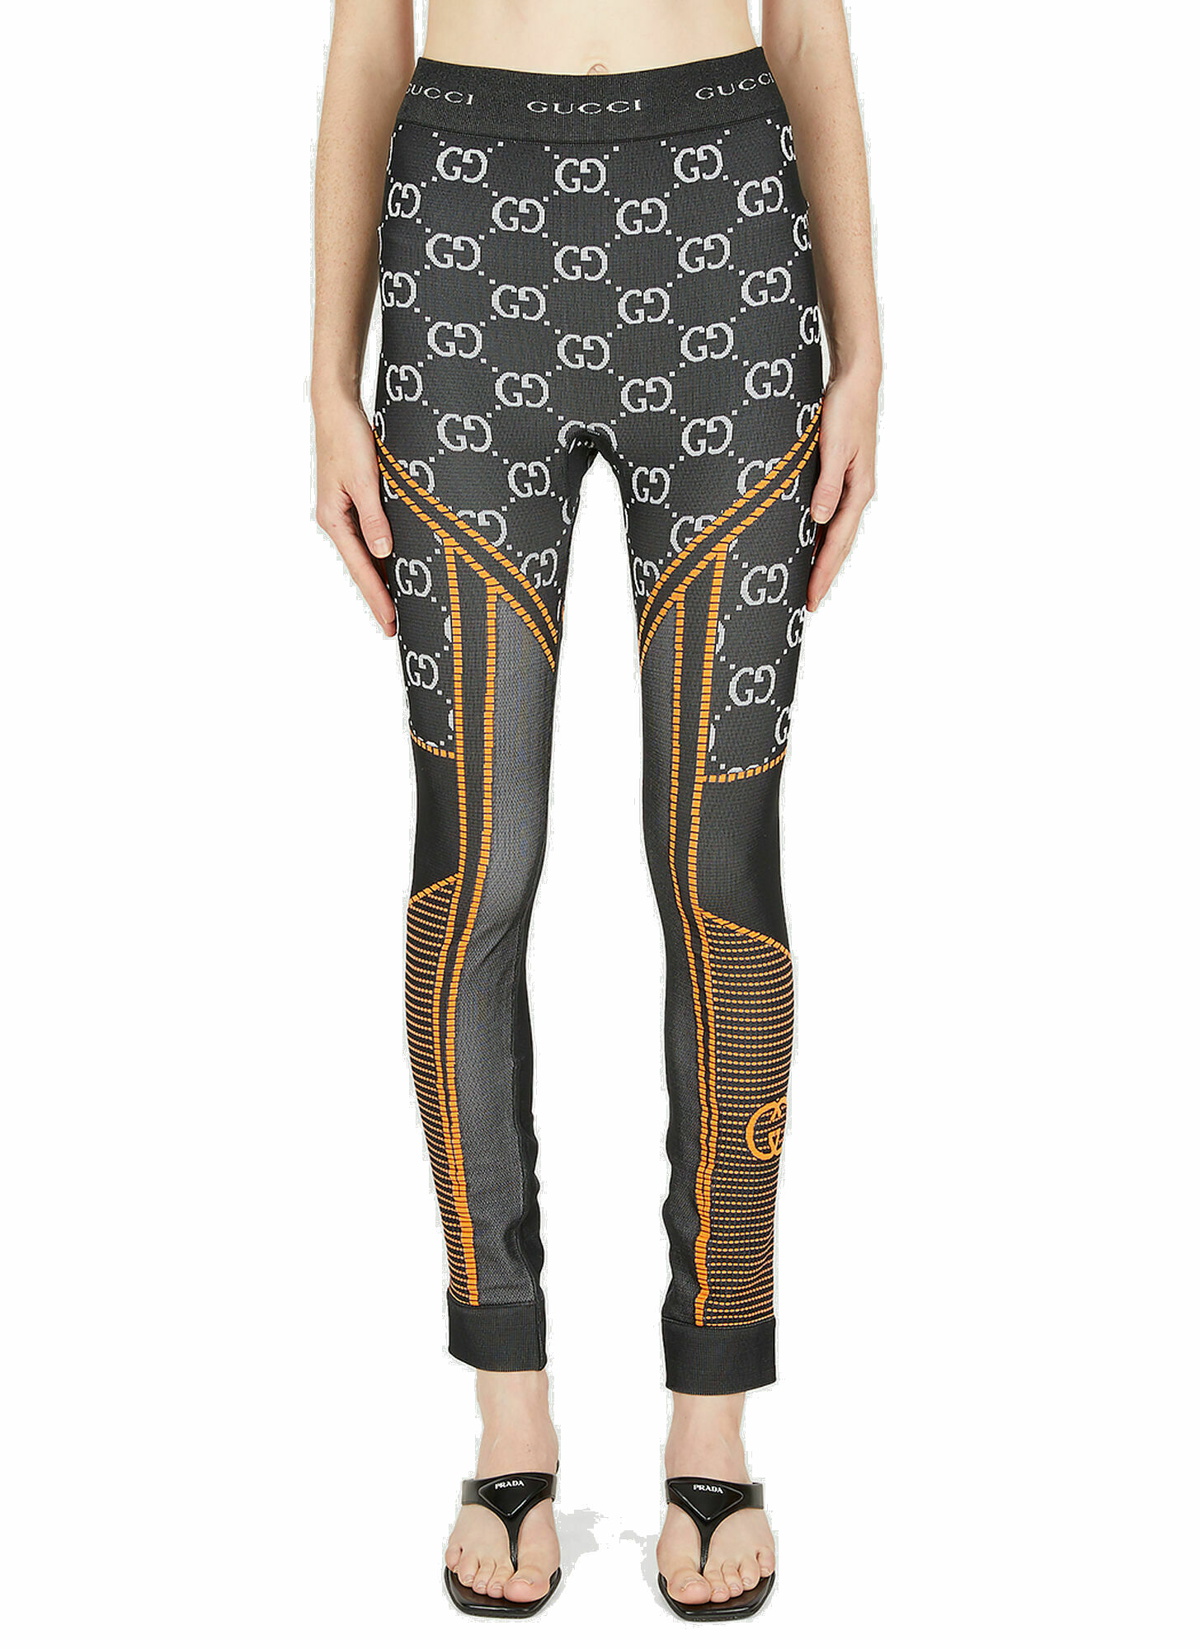 Gucci Leggings - 10 For Sale on 1stDibs  gucci leggings black, gucci  leggings womens, black gucci leggings